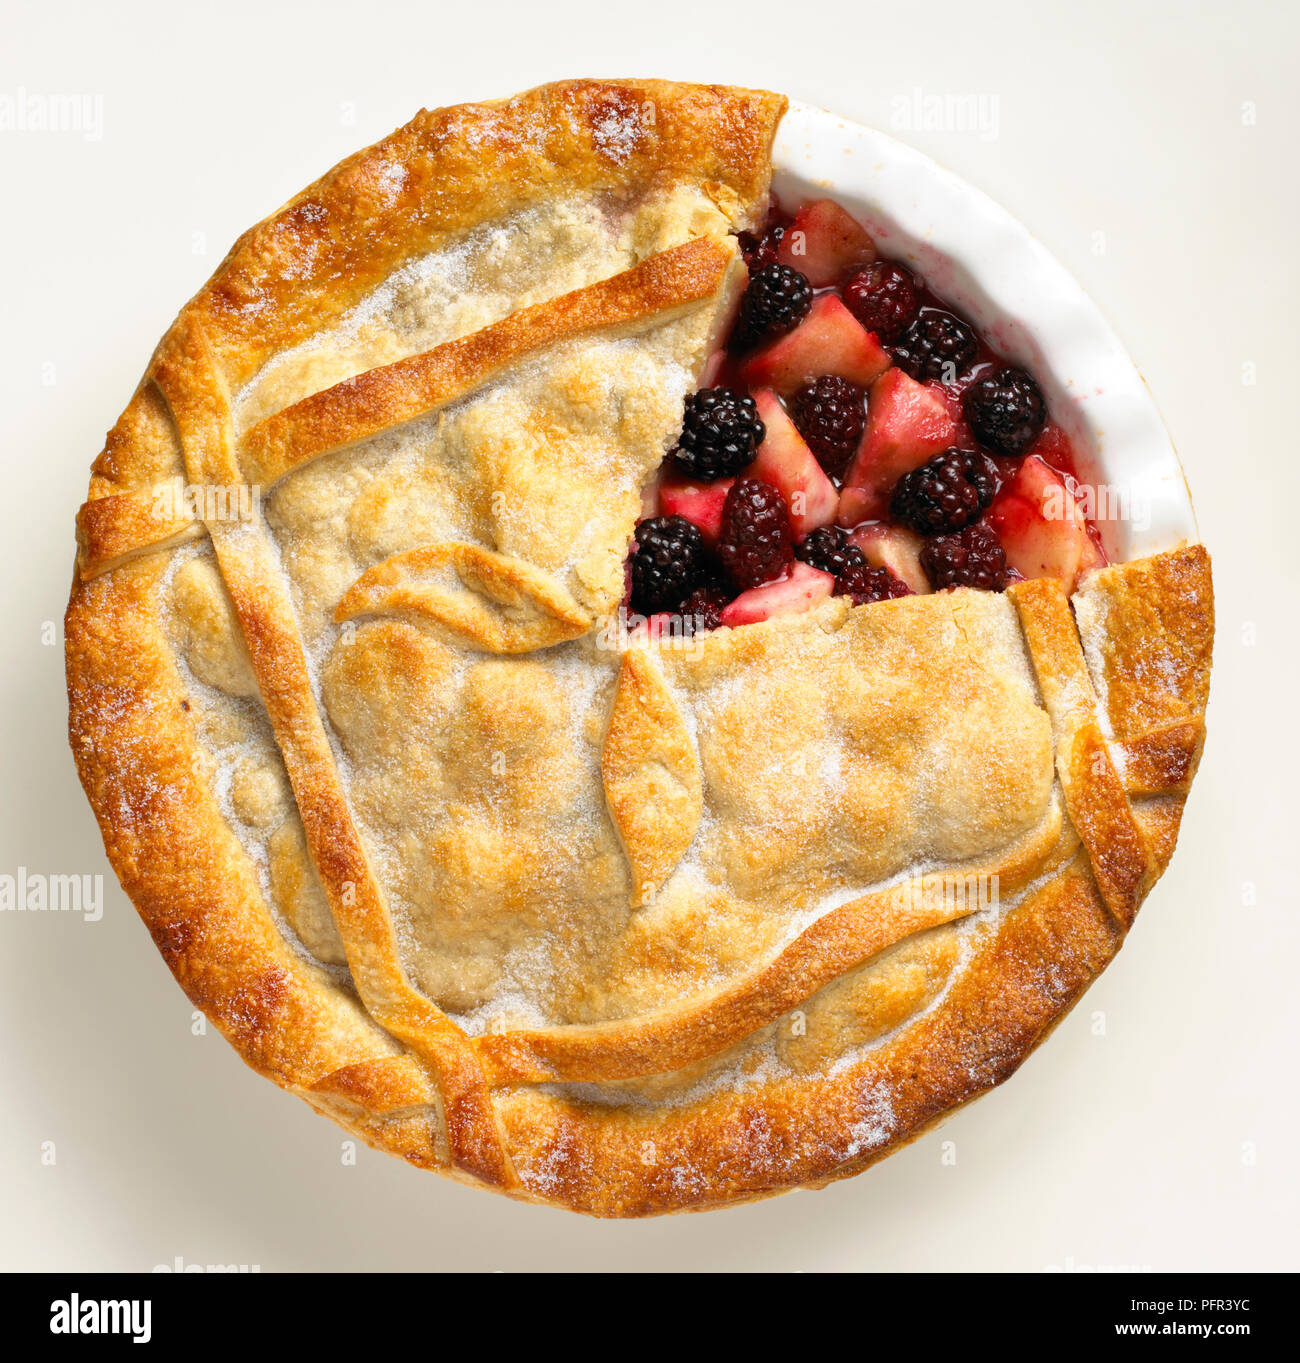 Blackberry and apple pie with part of crust removed, showing filling Stock Photo